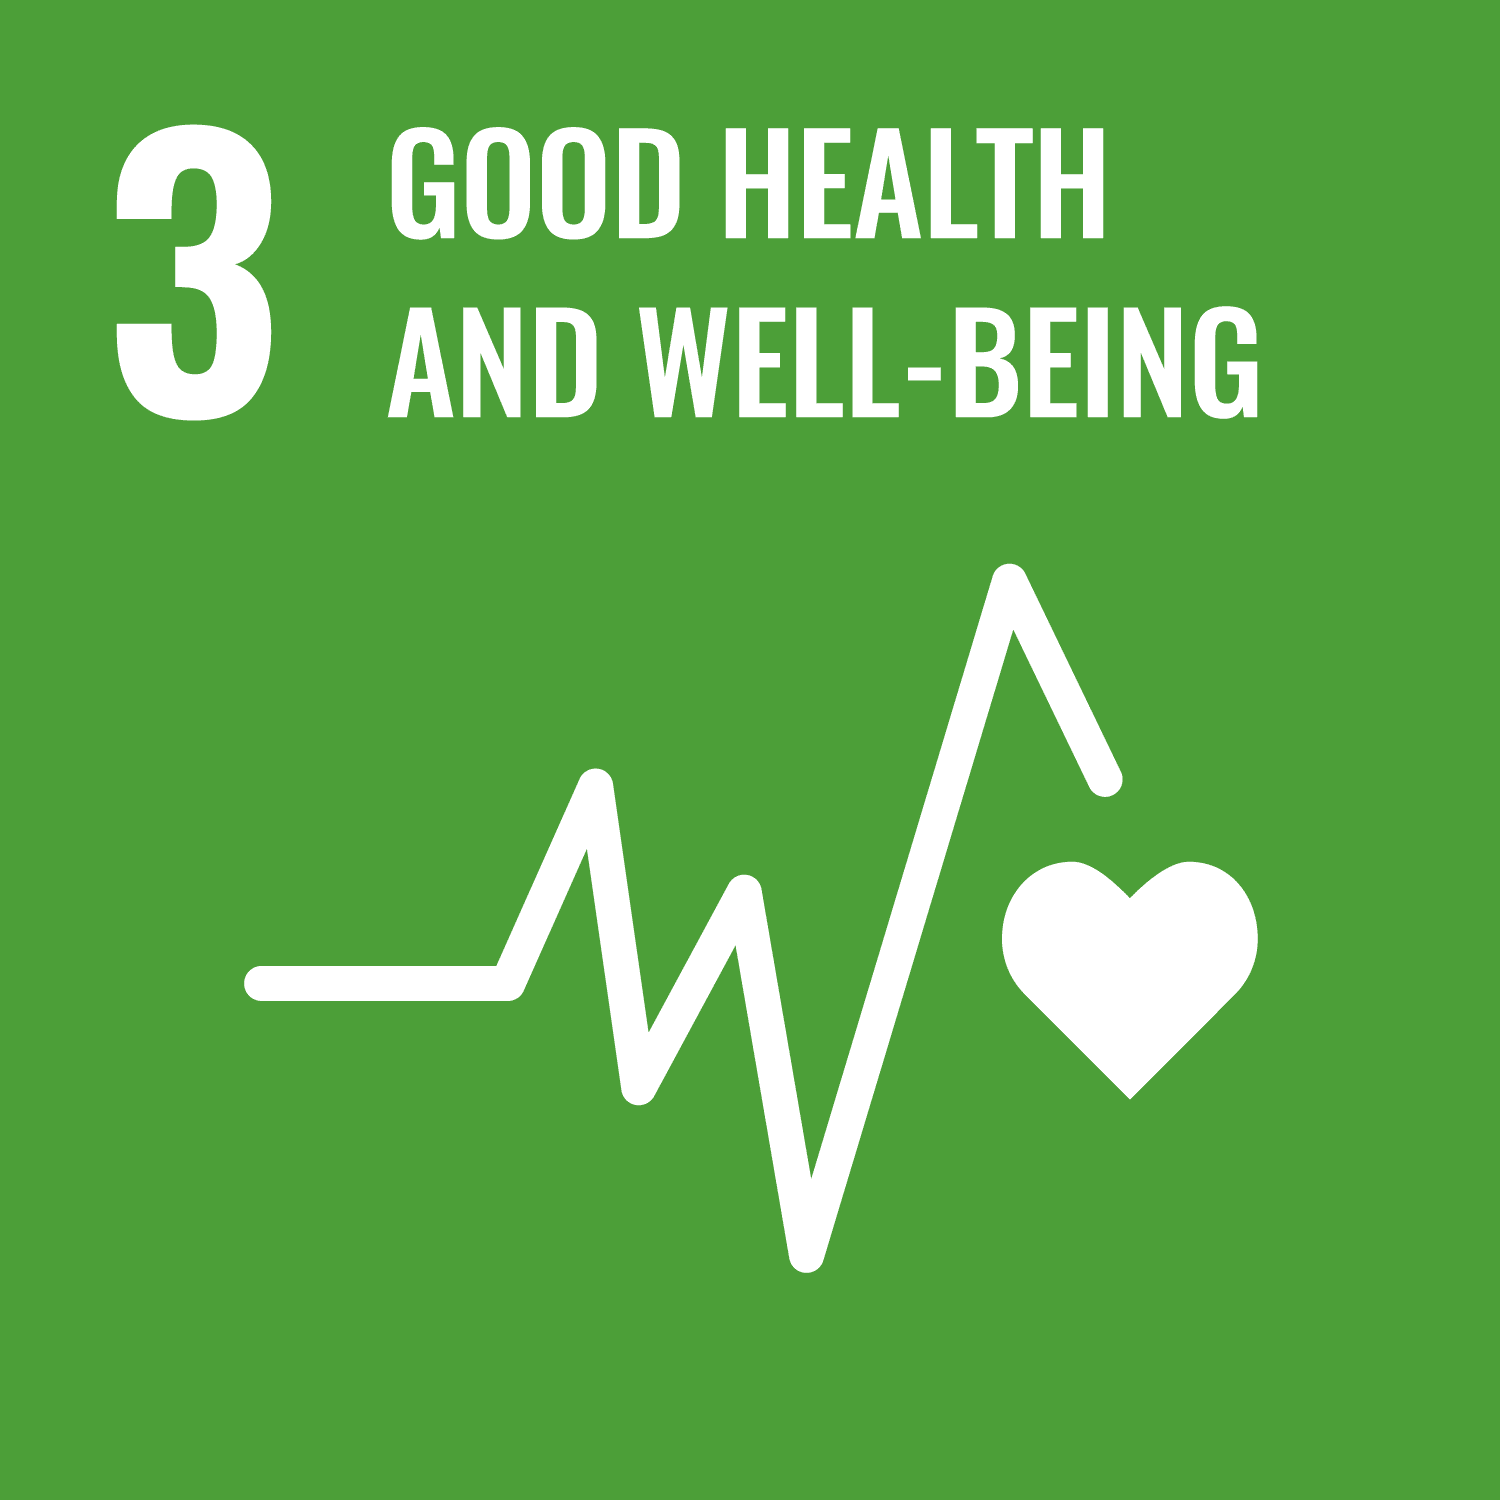 SDG 3 good health and well-beinf